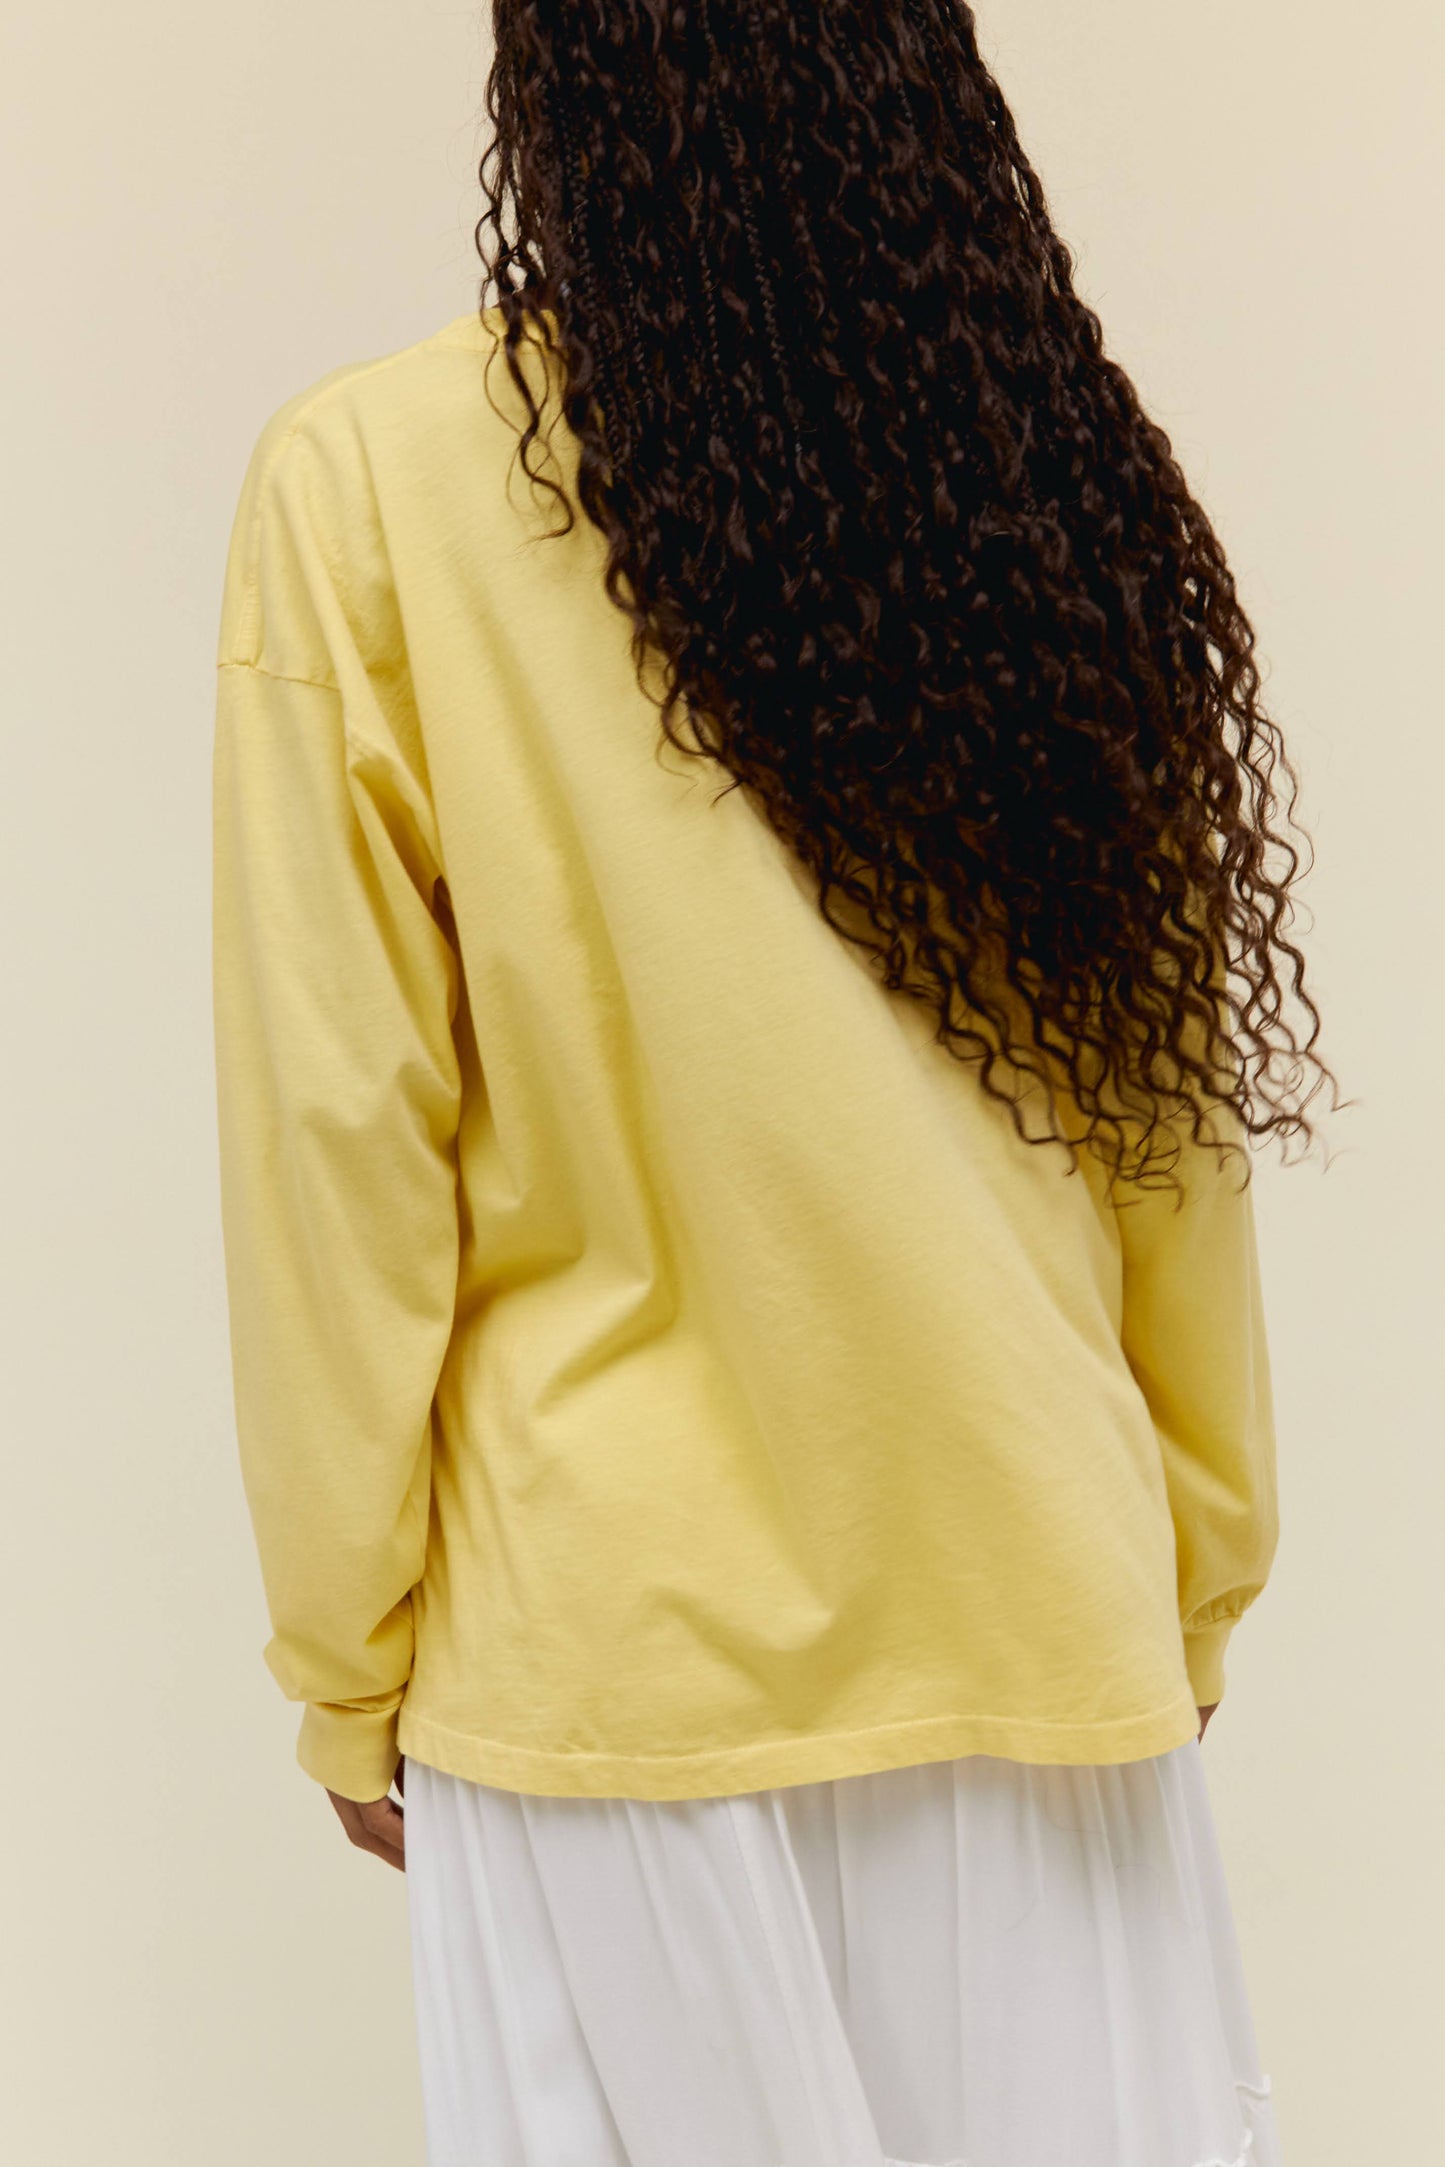 A model featuring a yellow long sleeve merch stamped with "Grateful Dead" in pink font and designed with a graphic of a surfing bear.